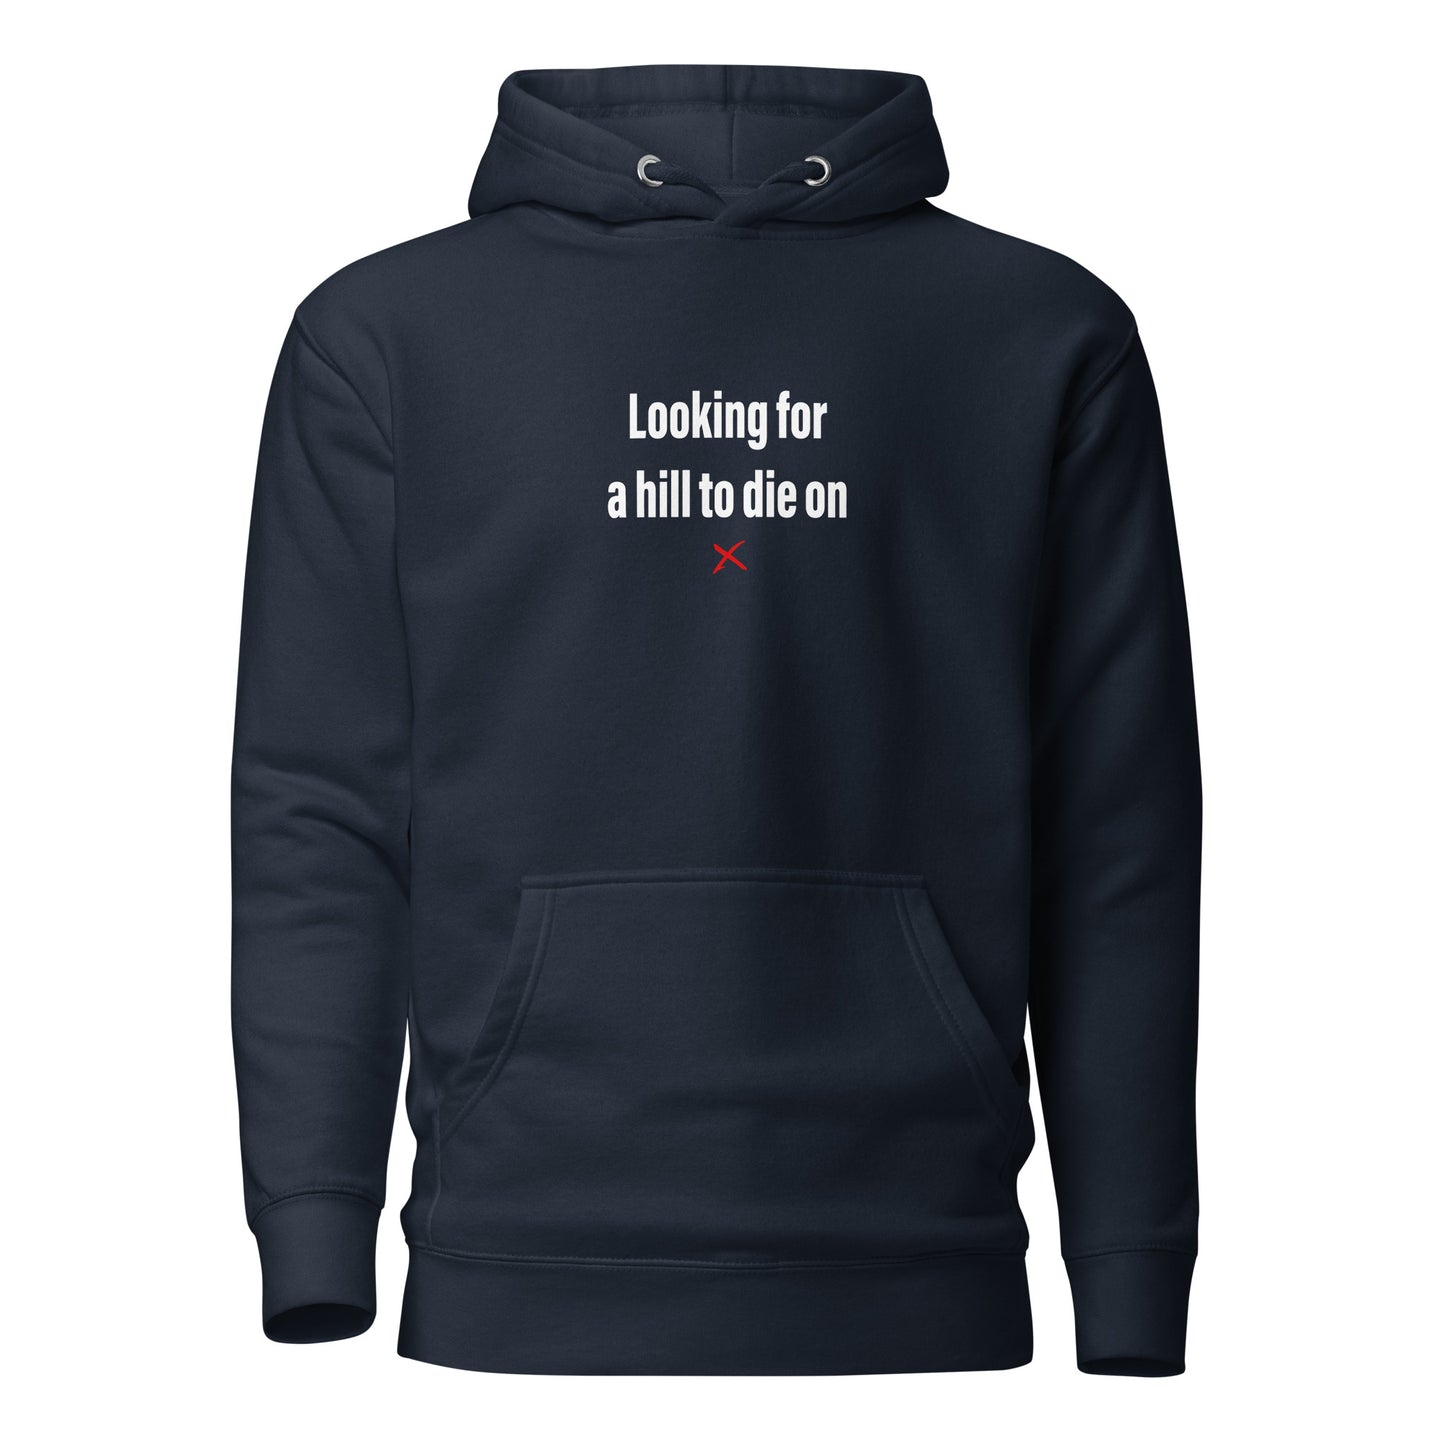 Looking for a hill to die on - Hoodie